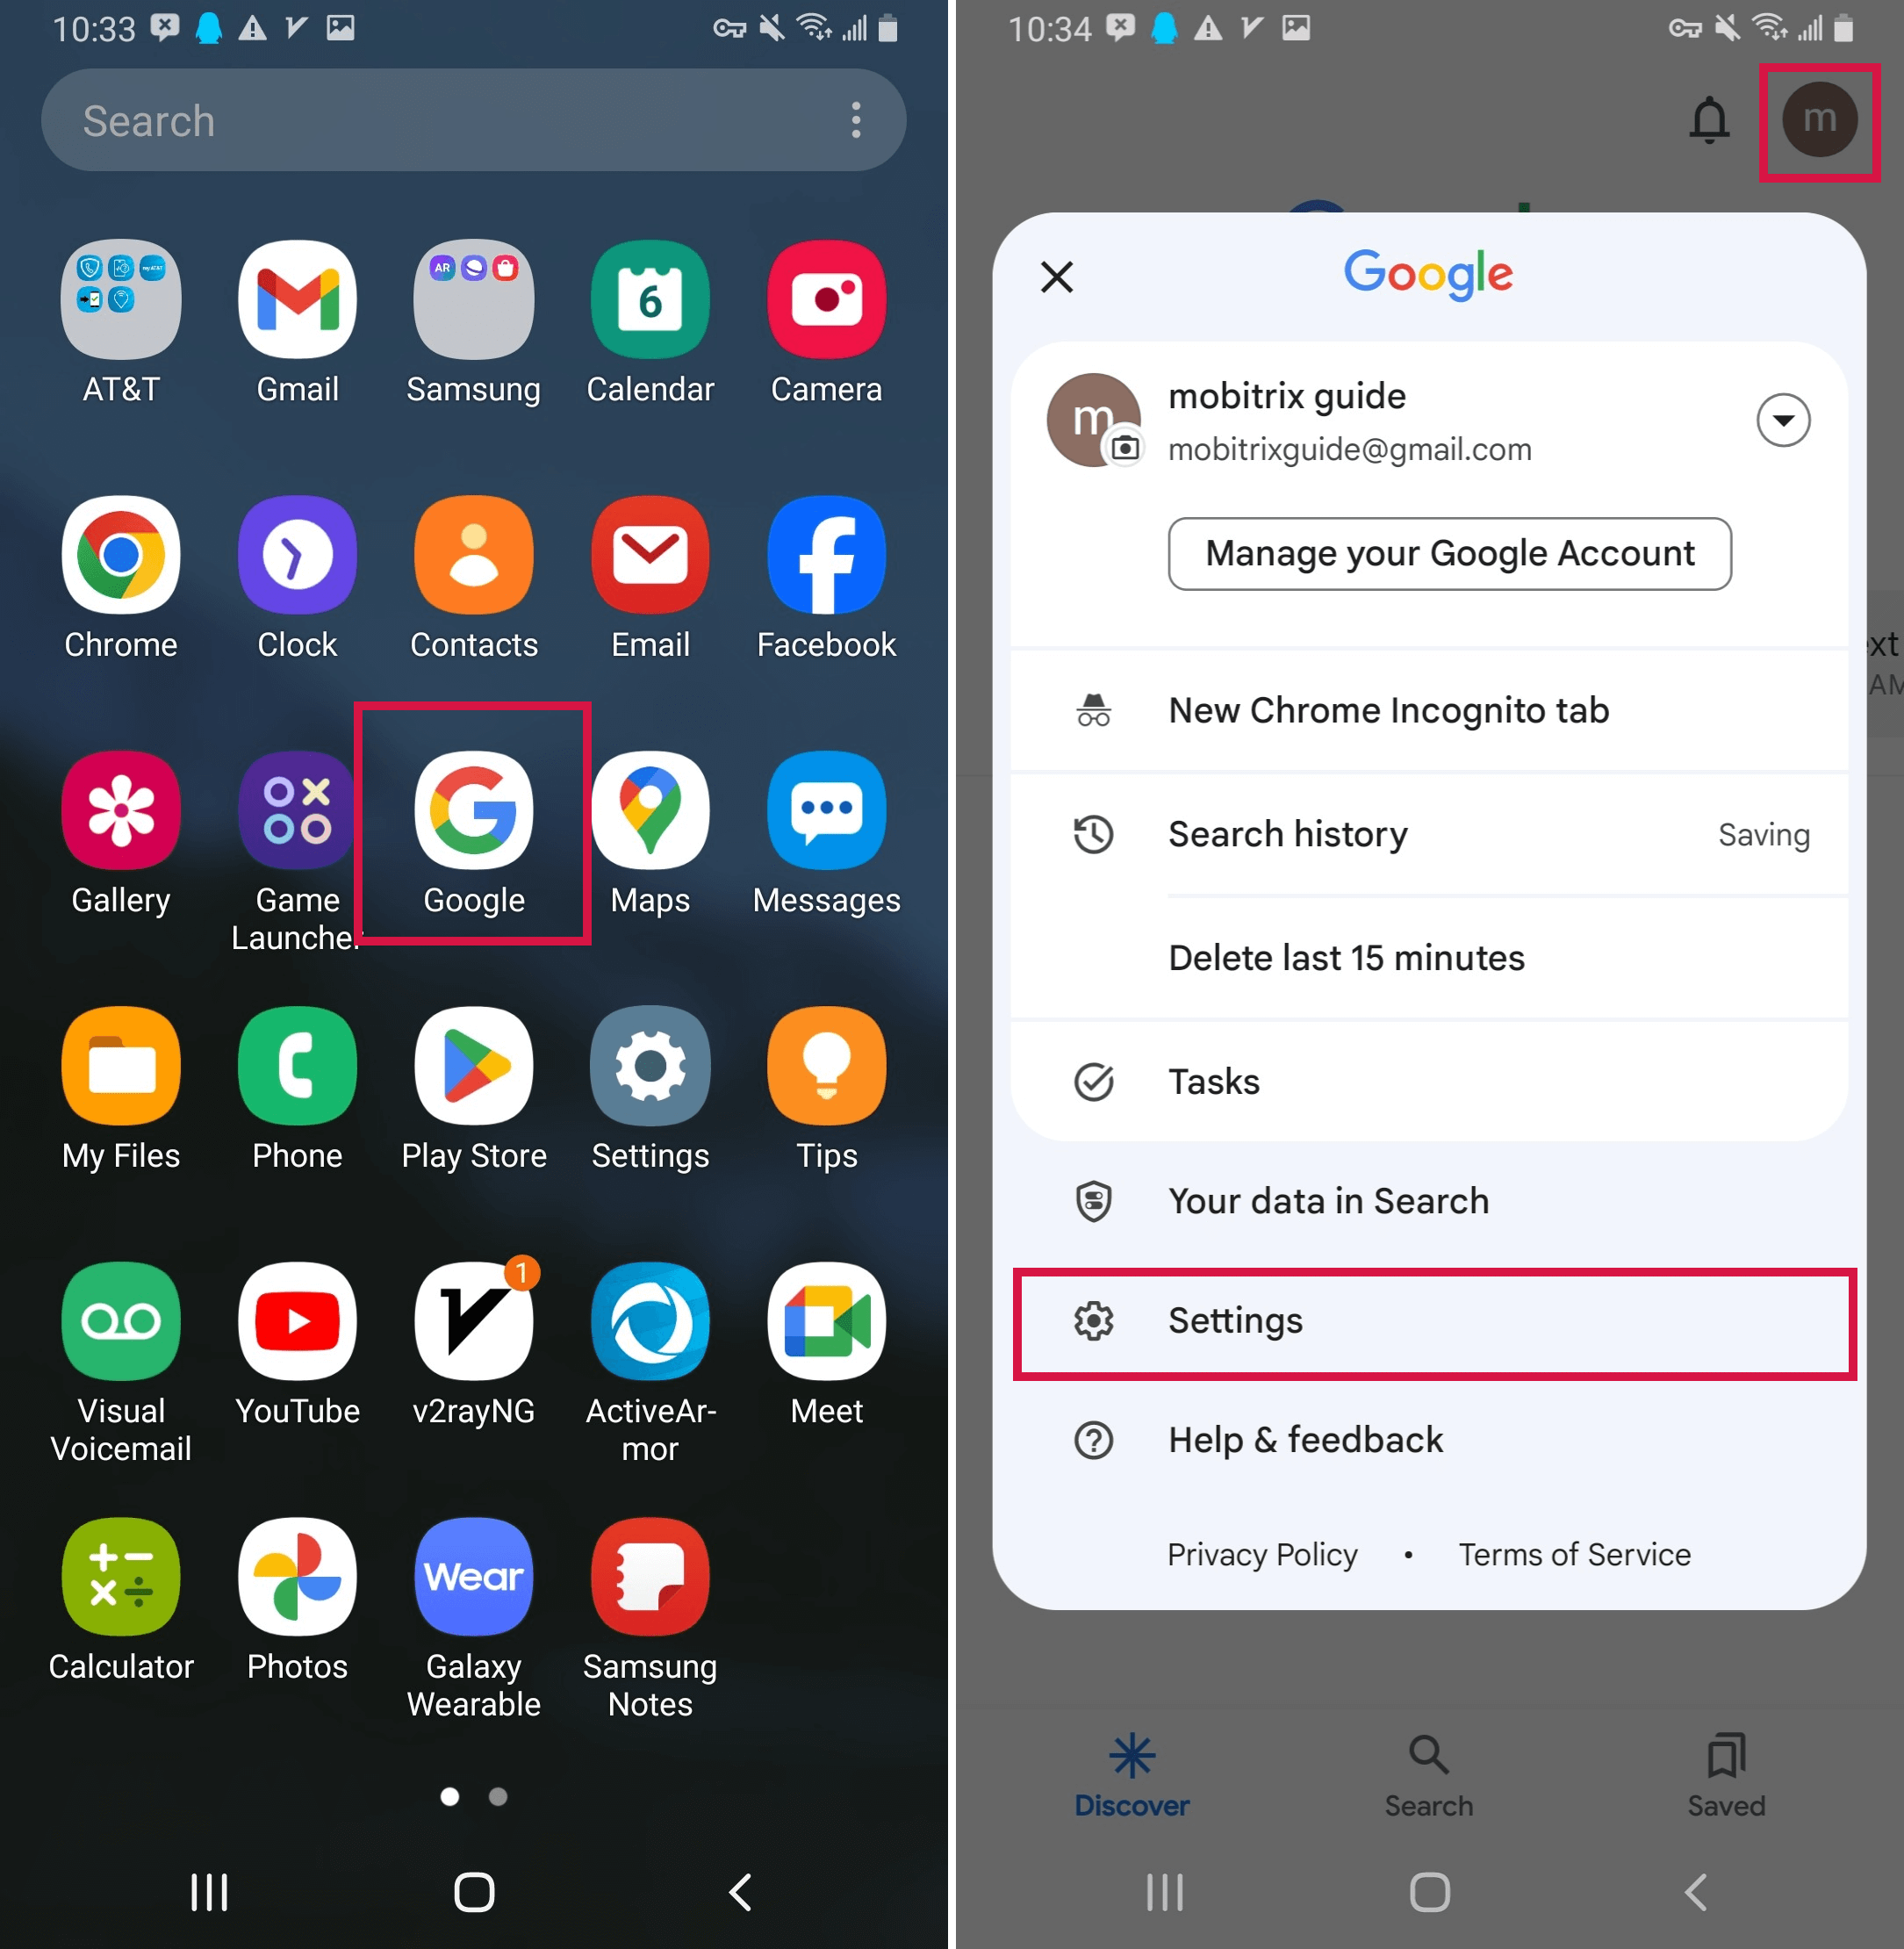 Open Google App then choose the More option then select Settings